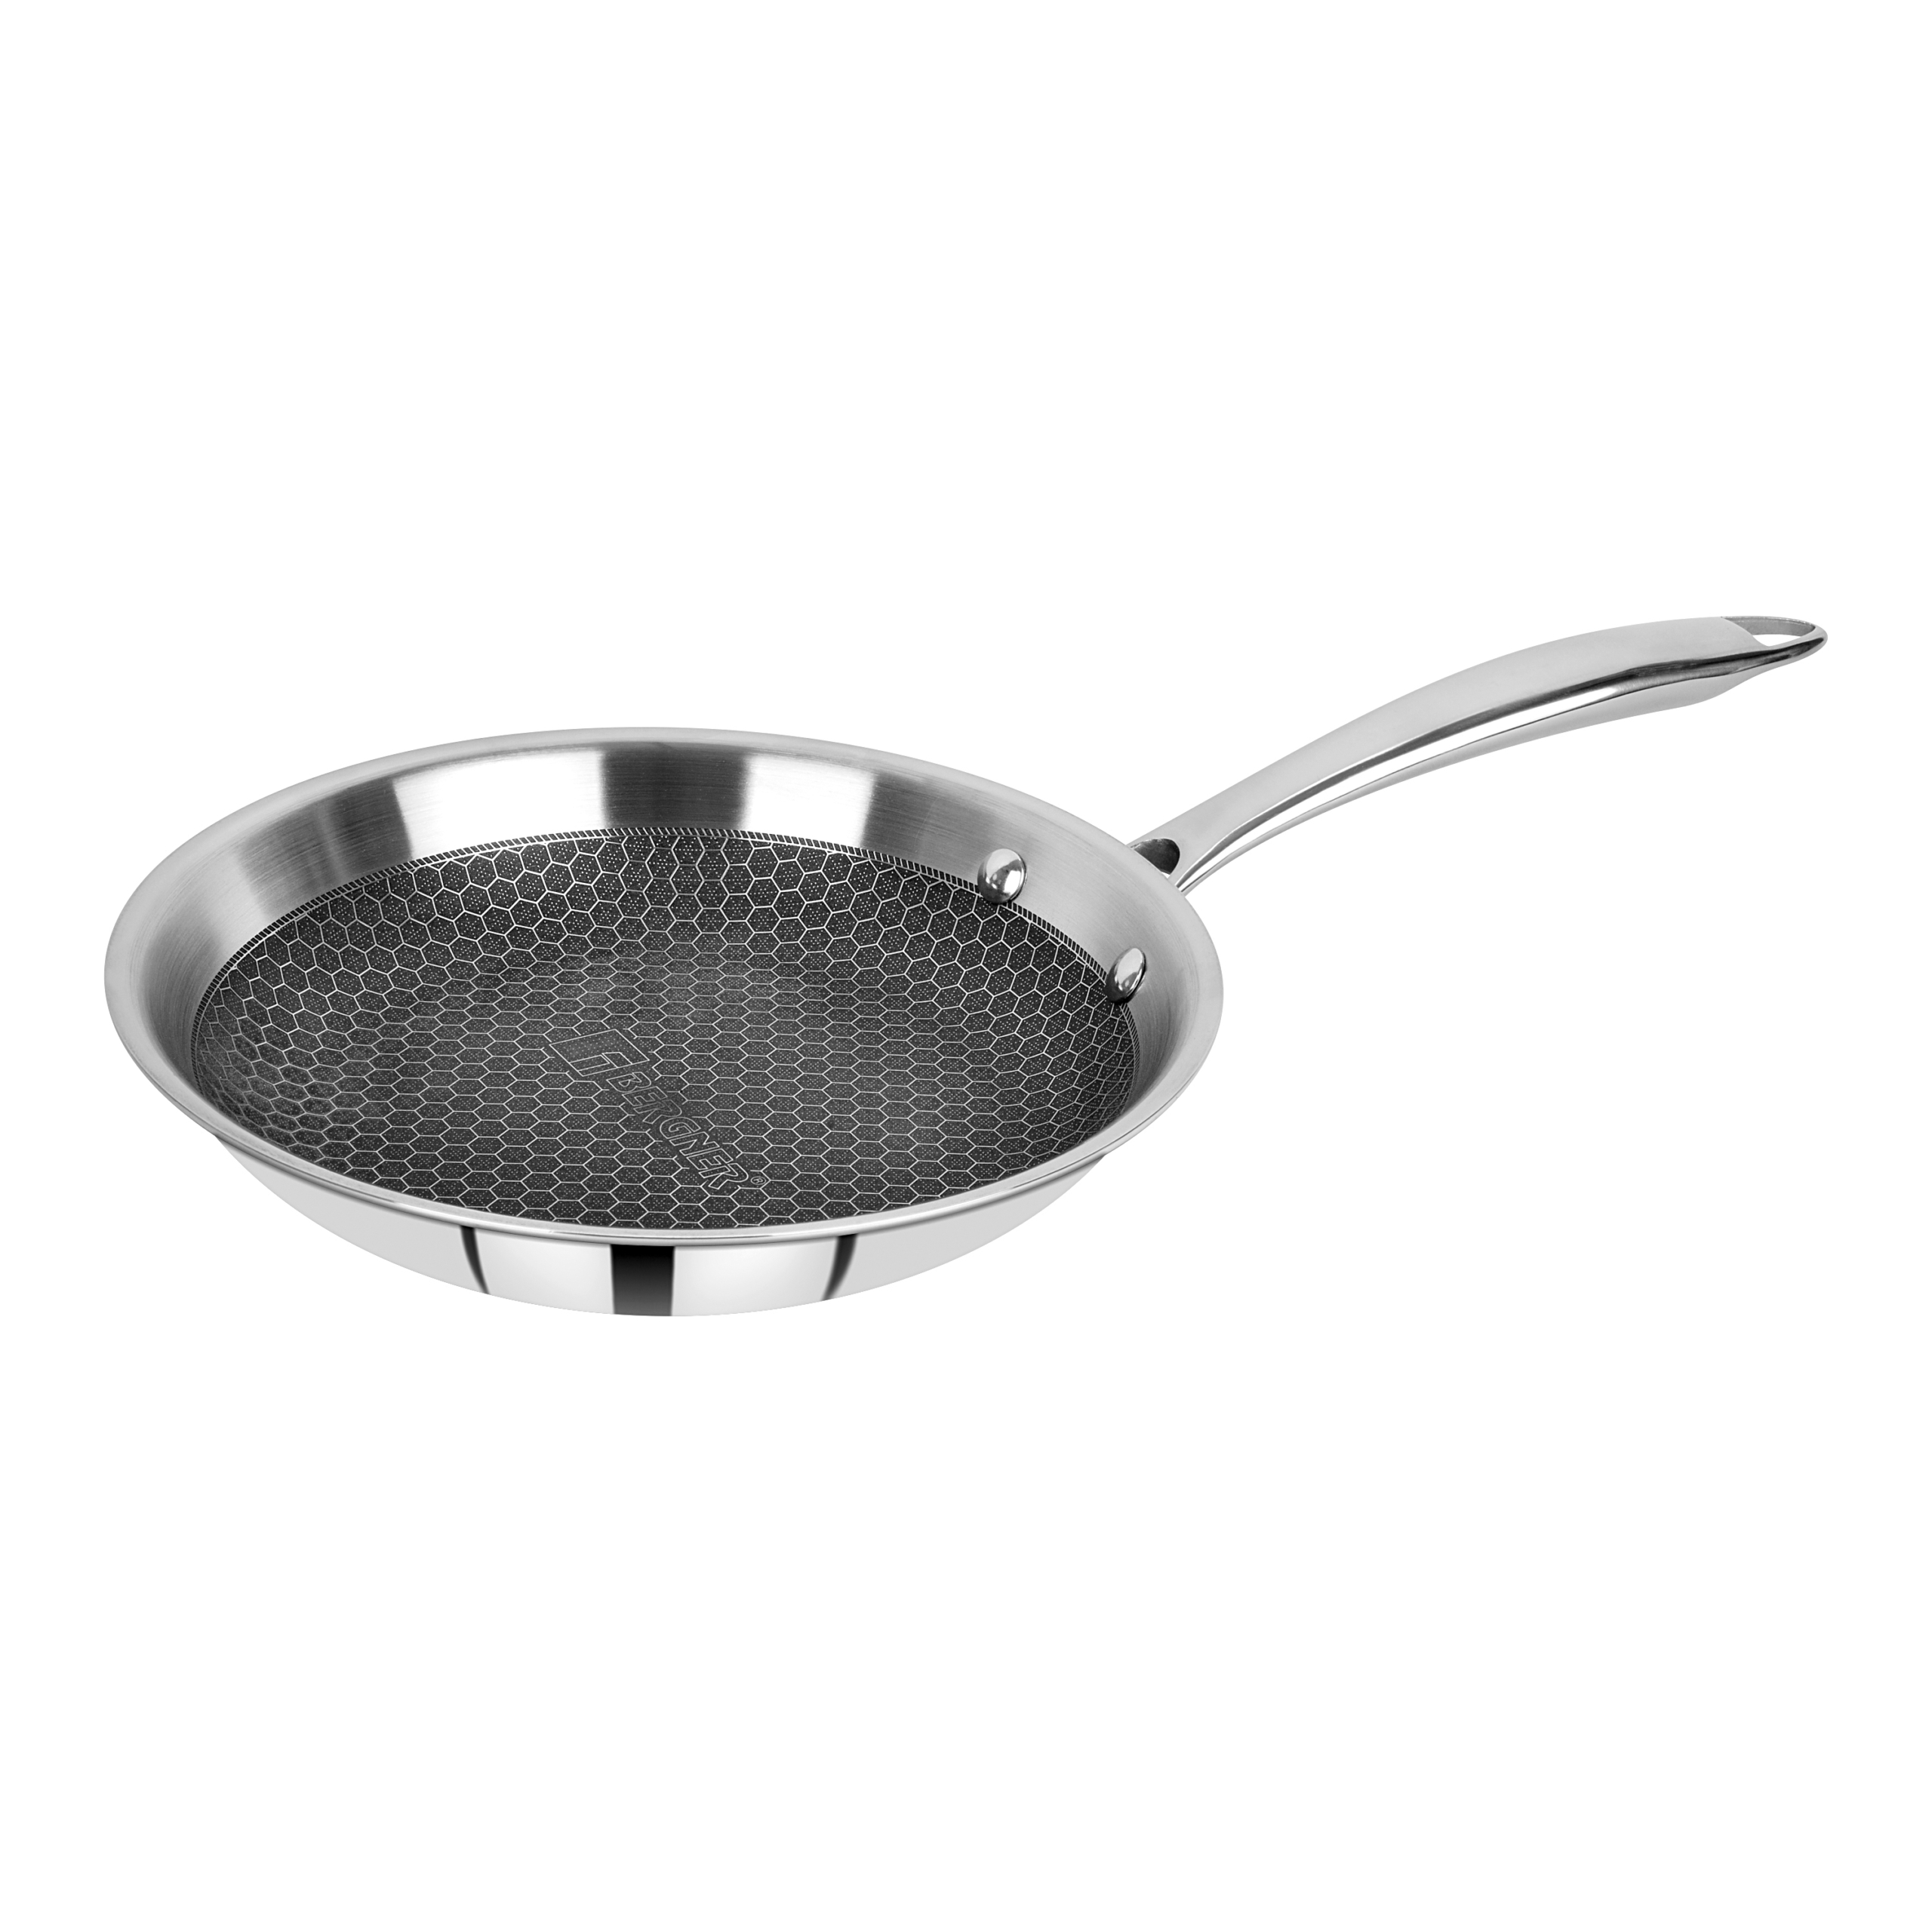 Bergner Hitech Triply Stainless Steel Scratch Resistant Non Stick